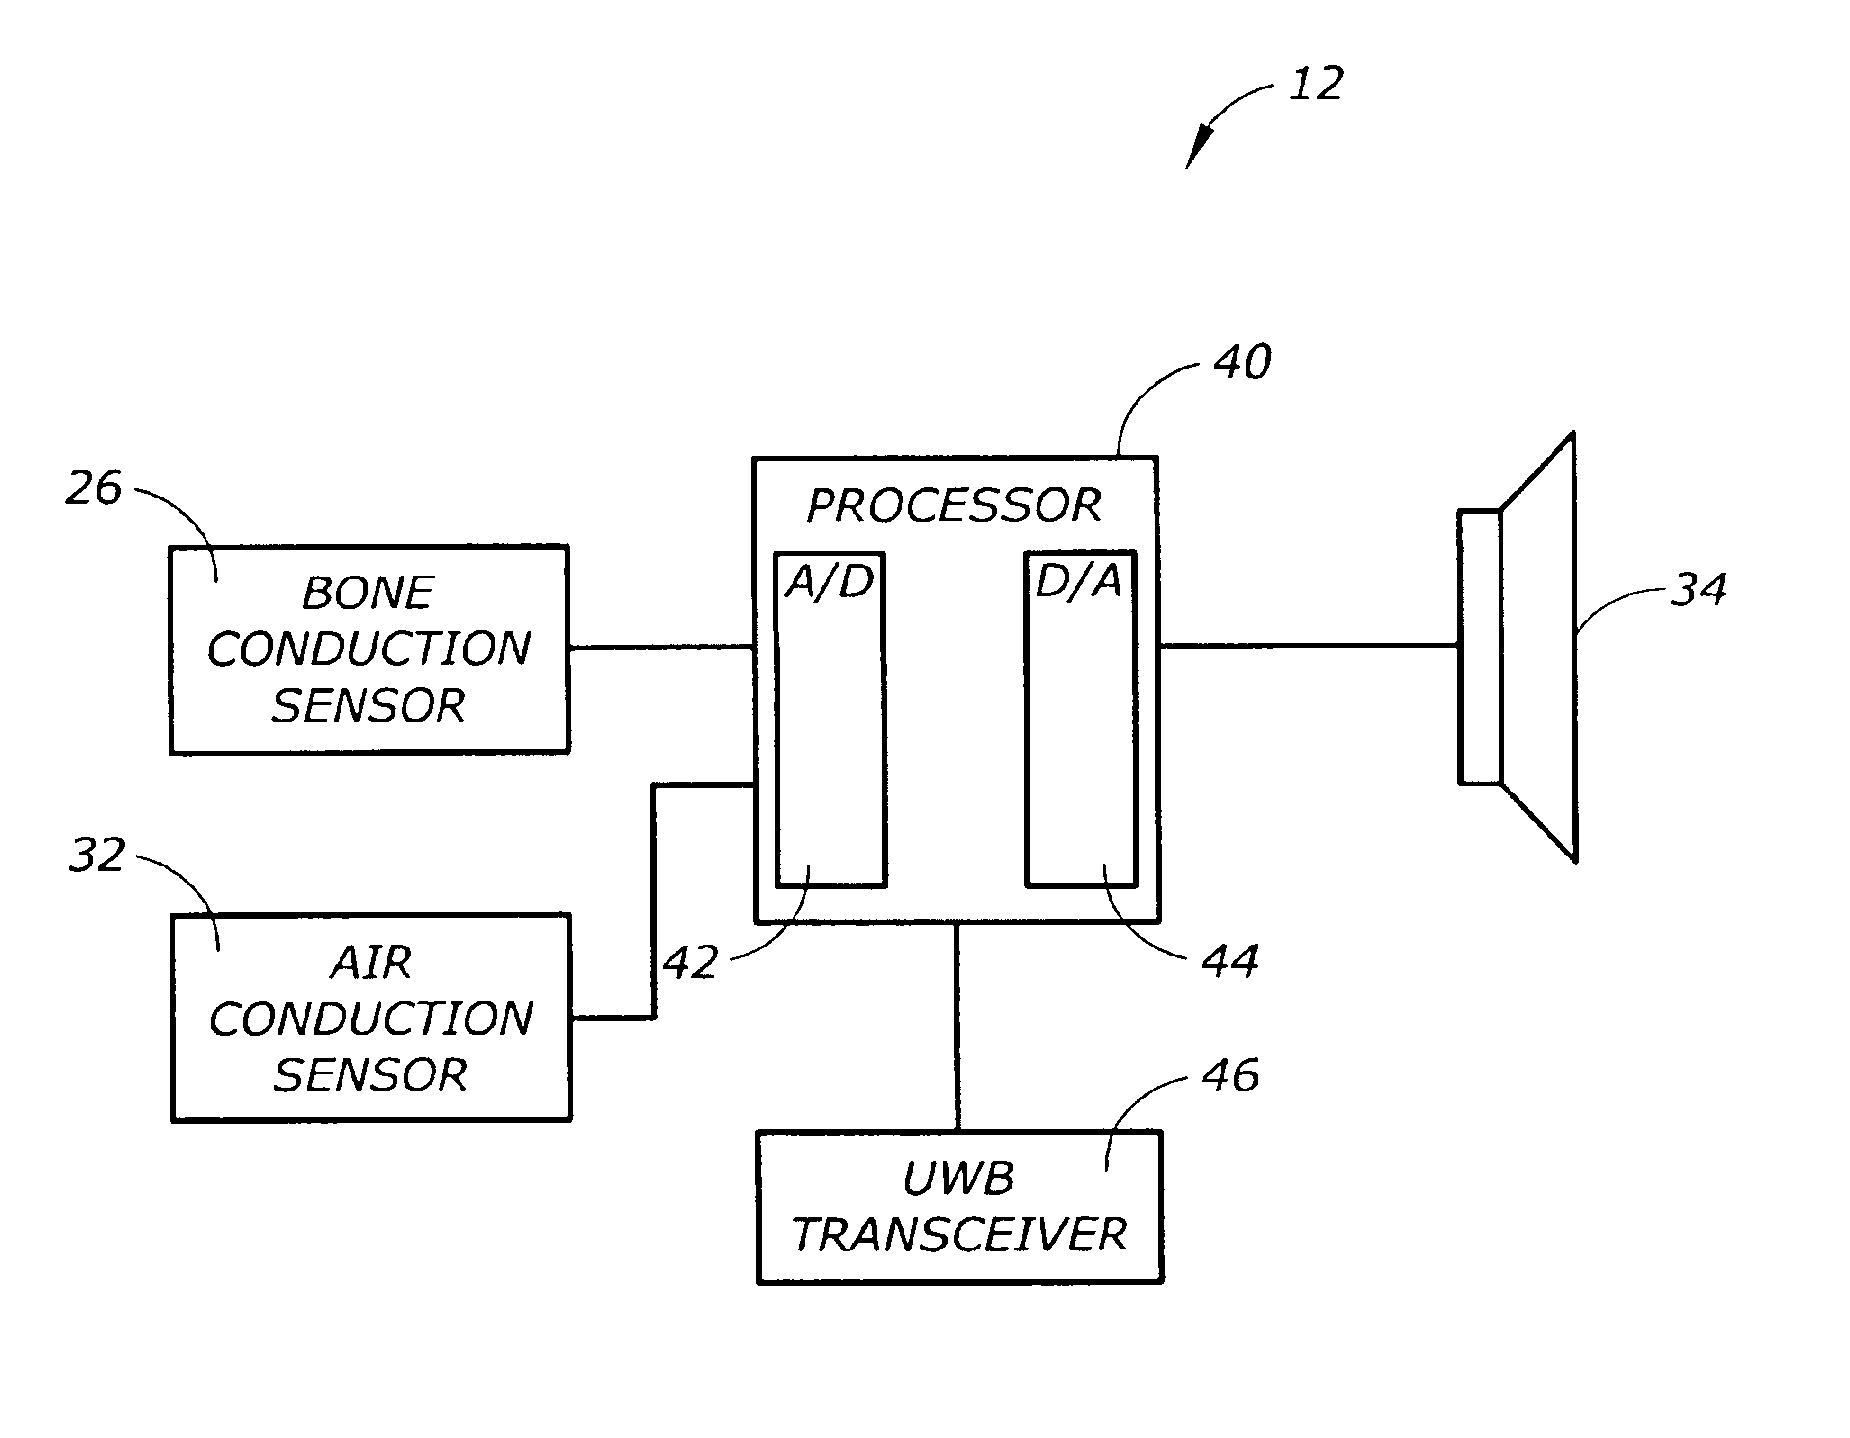 Voice transmission apparatus with UWB